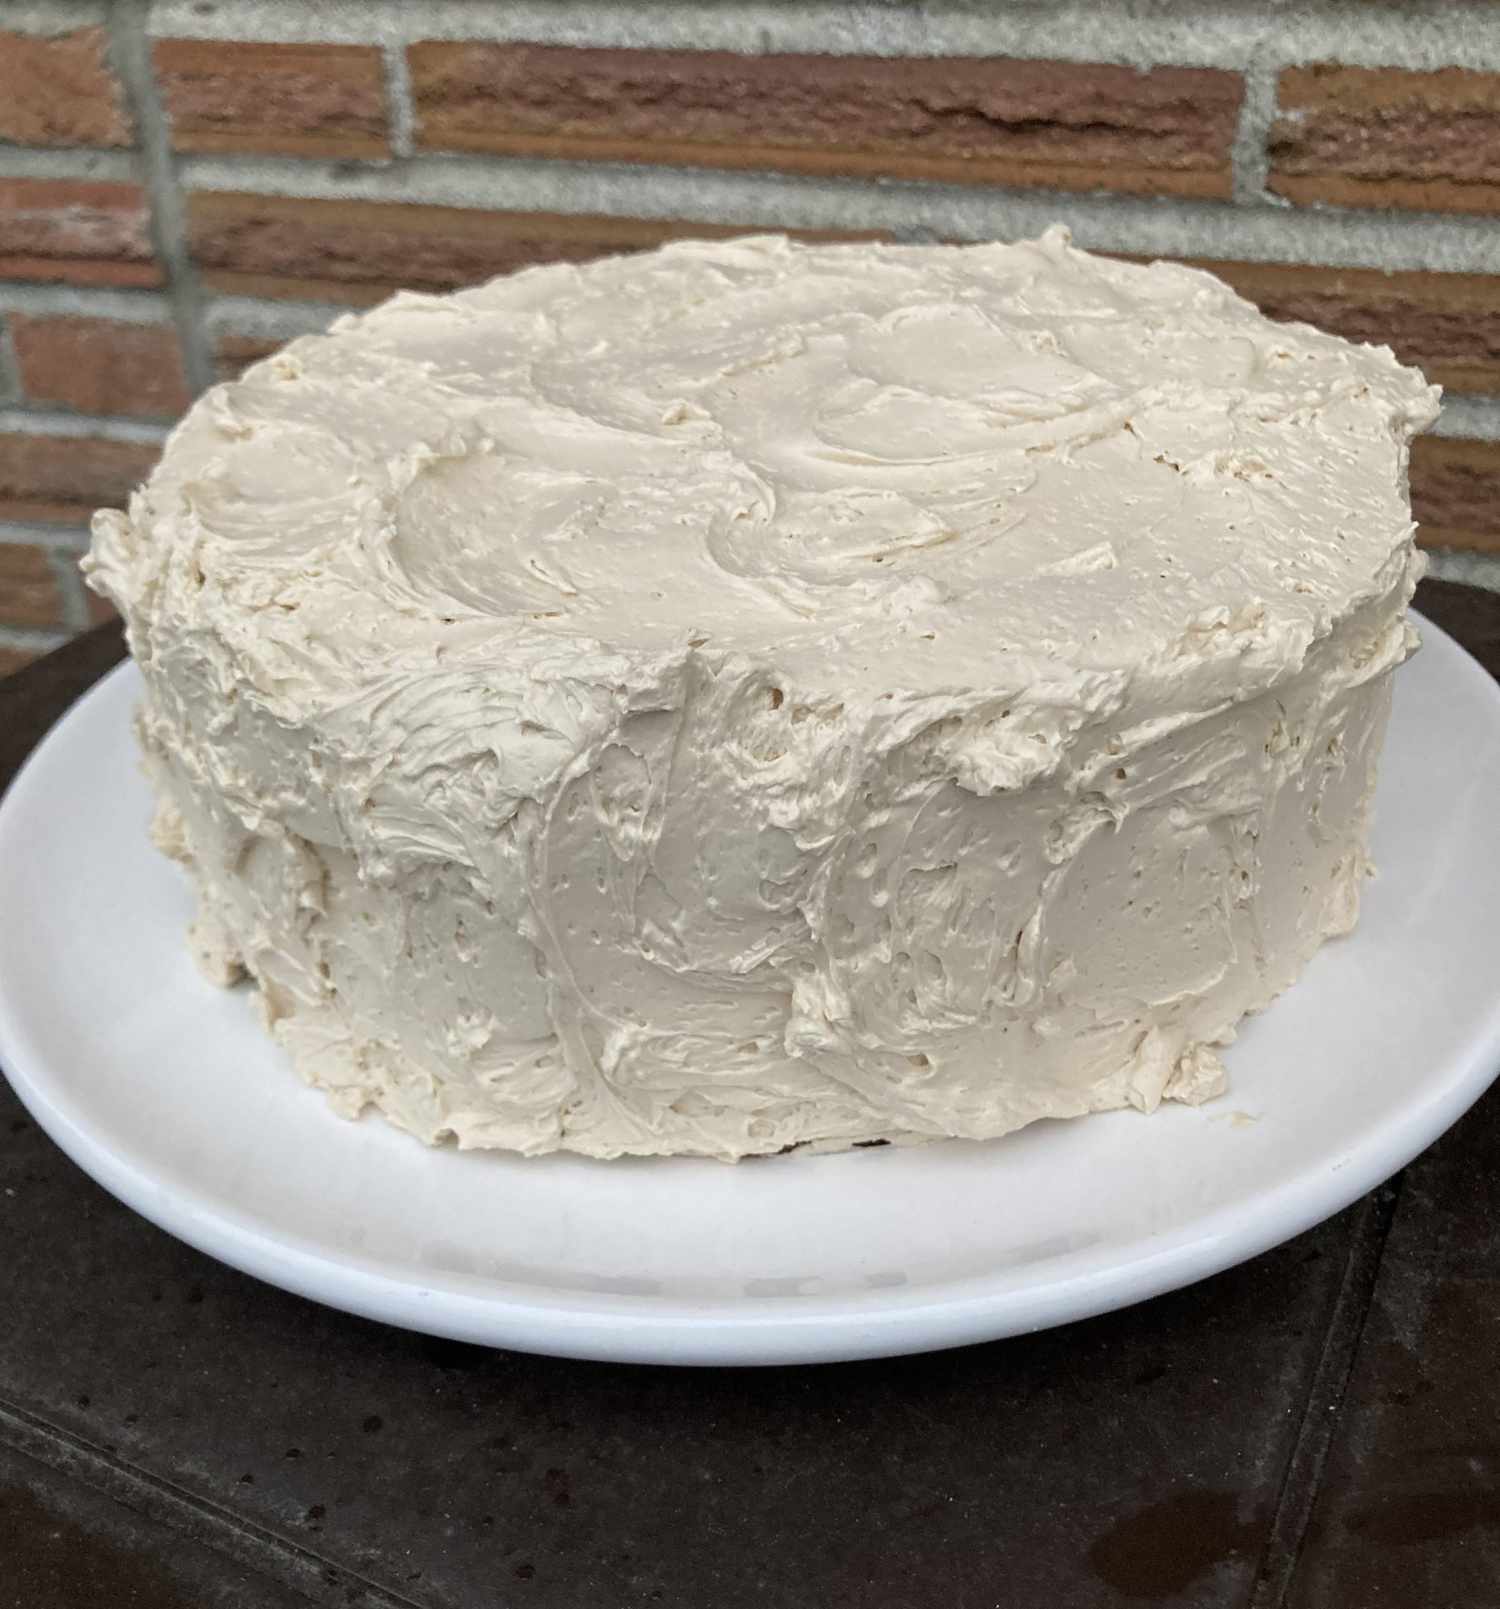 a frosted layer cake with fluffy-looking ivory colored buttercream